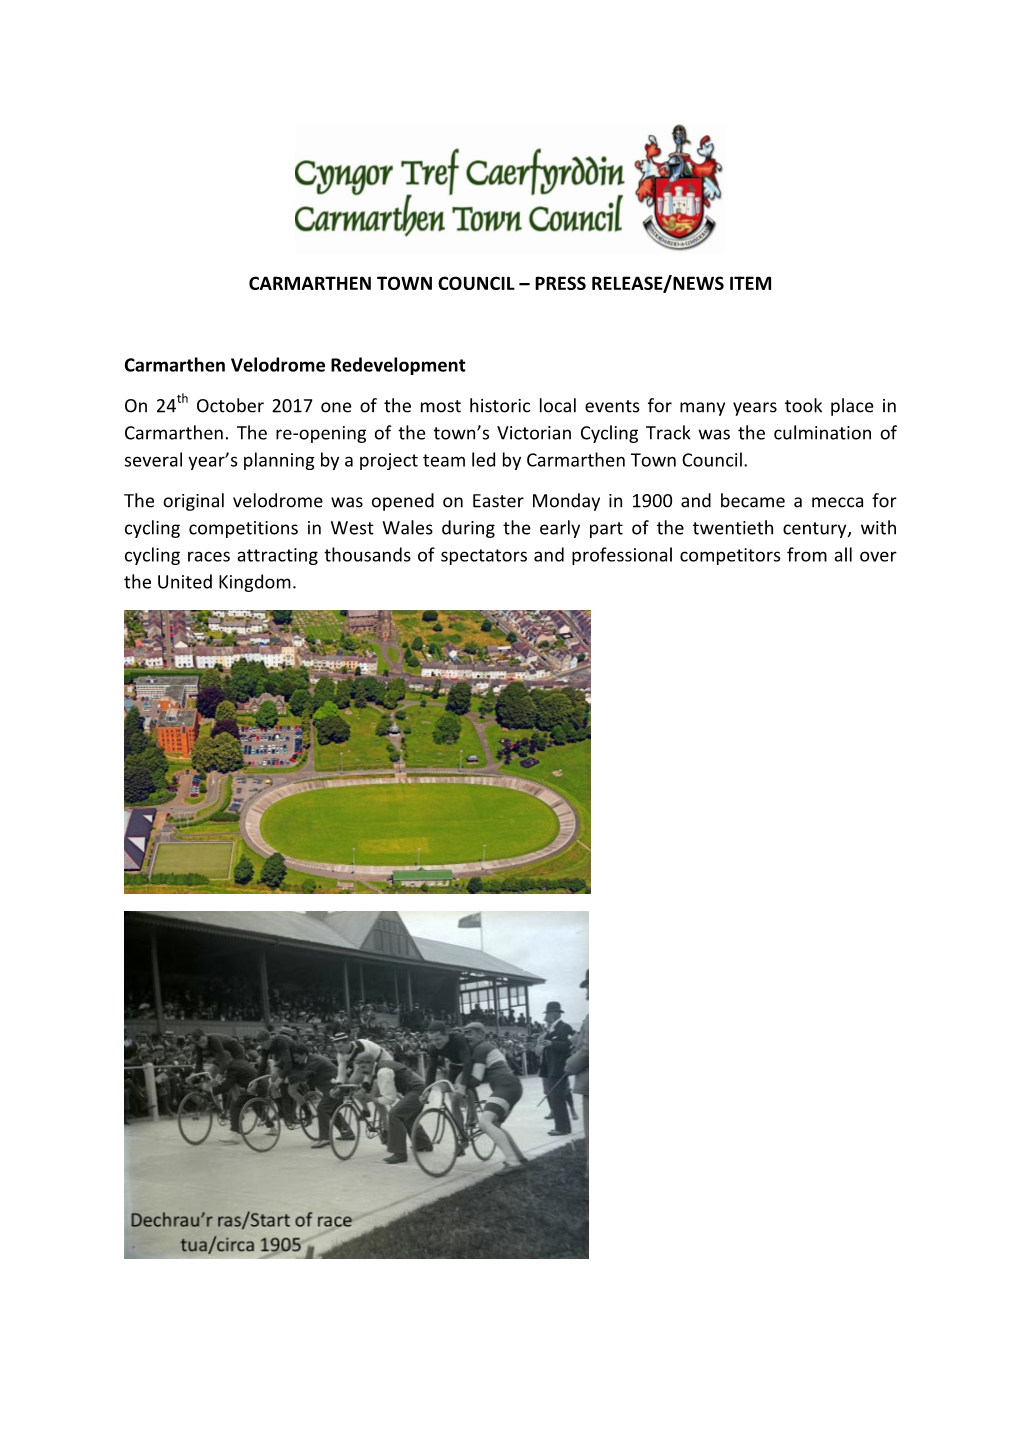 Carmarthen Velodrome Redevelopment on 24Th October 2017 One of the Most Historic Local Events for Many Years Took Place in Carmarthen